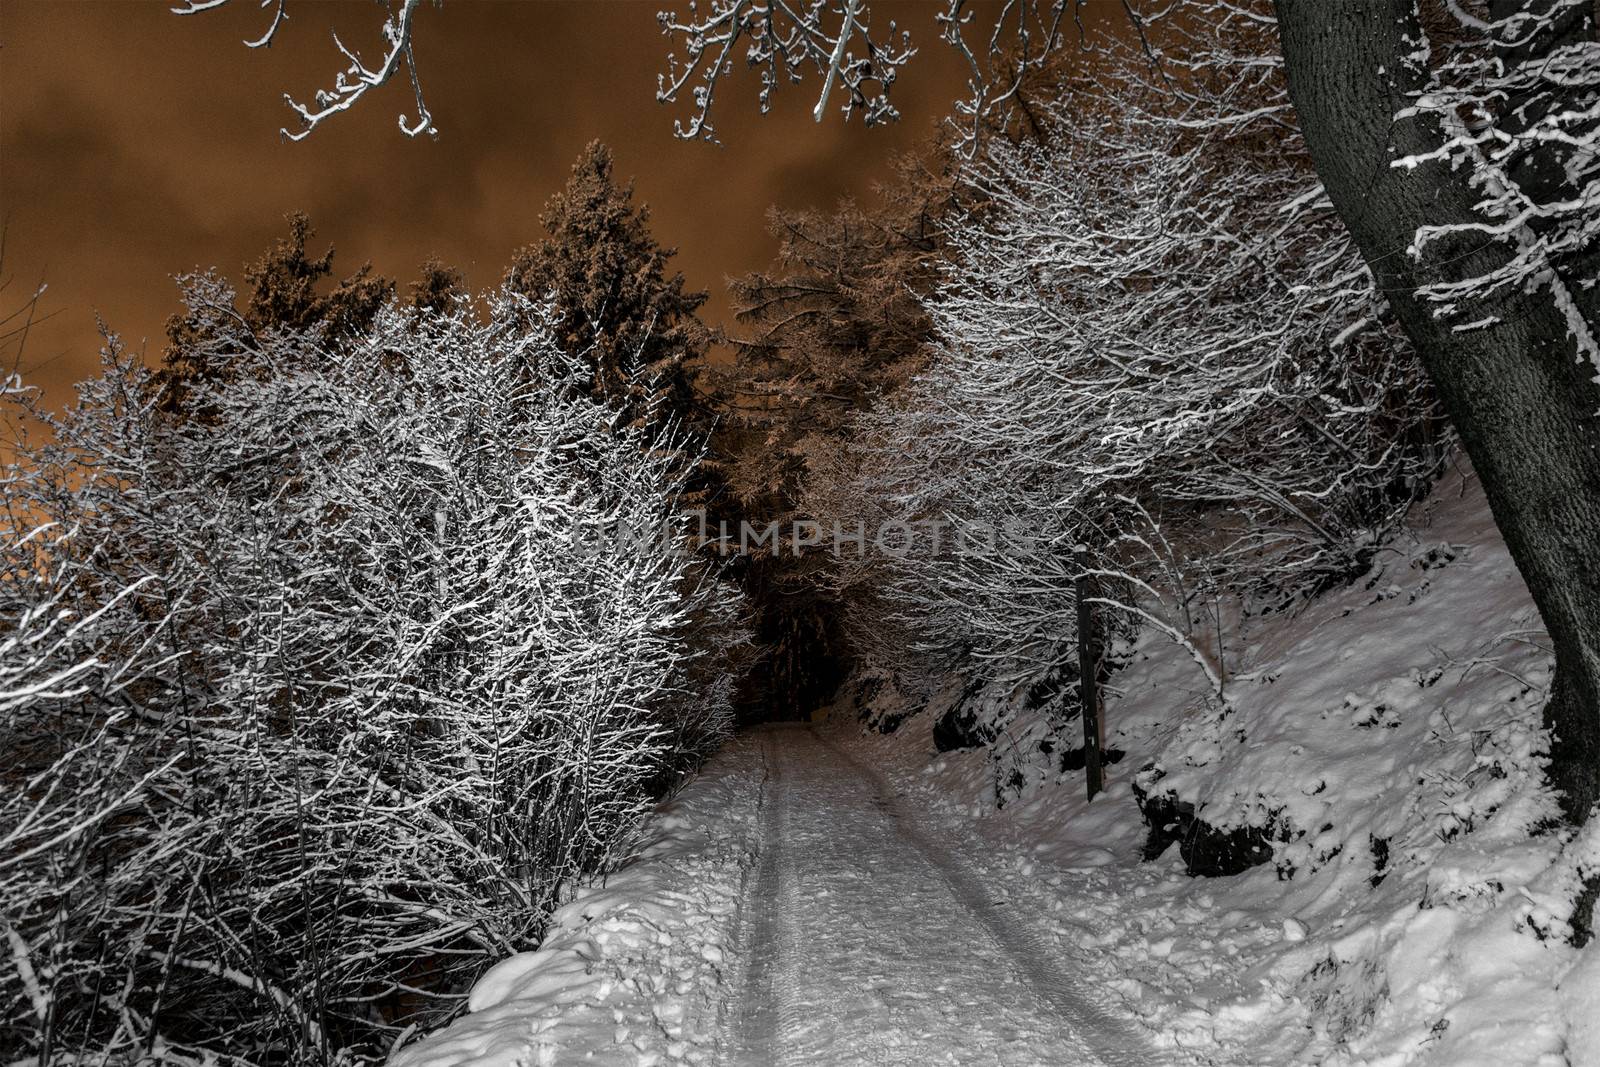 Mountain path in winter night, Varese by Mdc1970